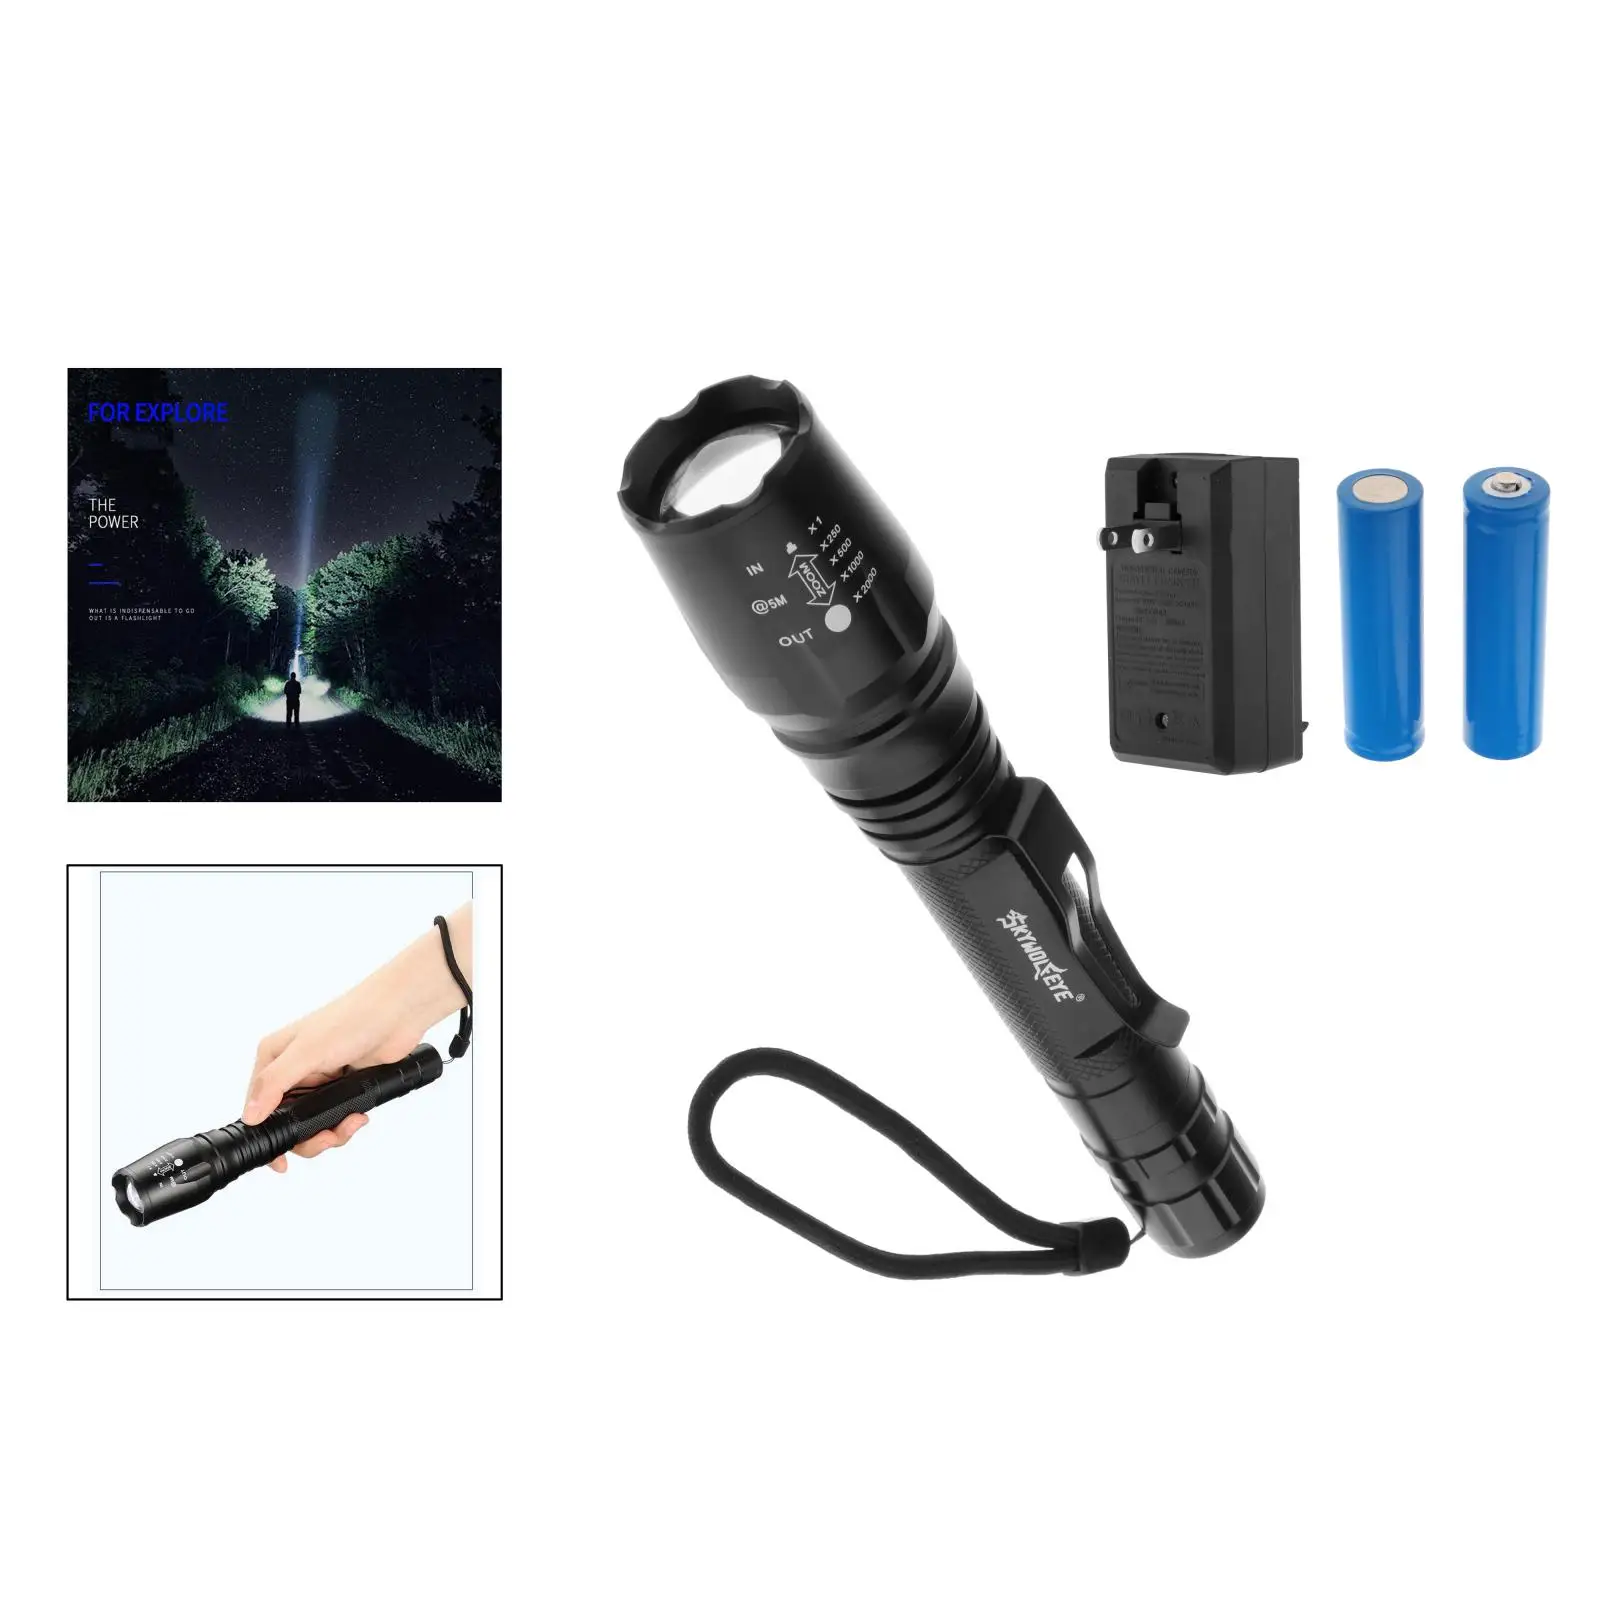 LED Tactical Flashlight 5 Modes, Waterproof, Zoomable, Solid Handheld Light Torch with Lanyard, 18650 Batteries, Charge Adapter